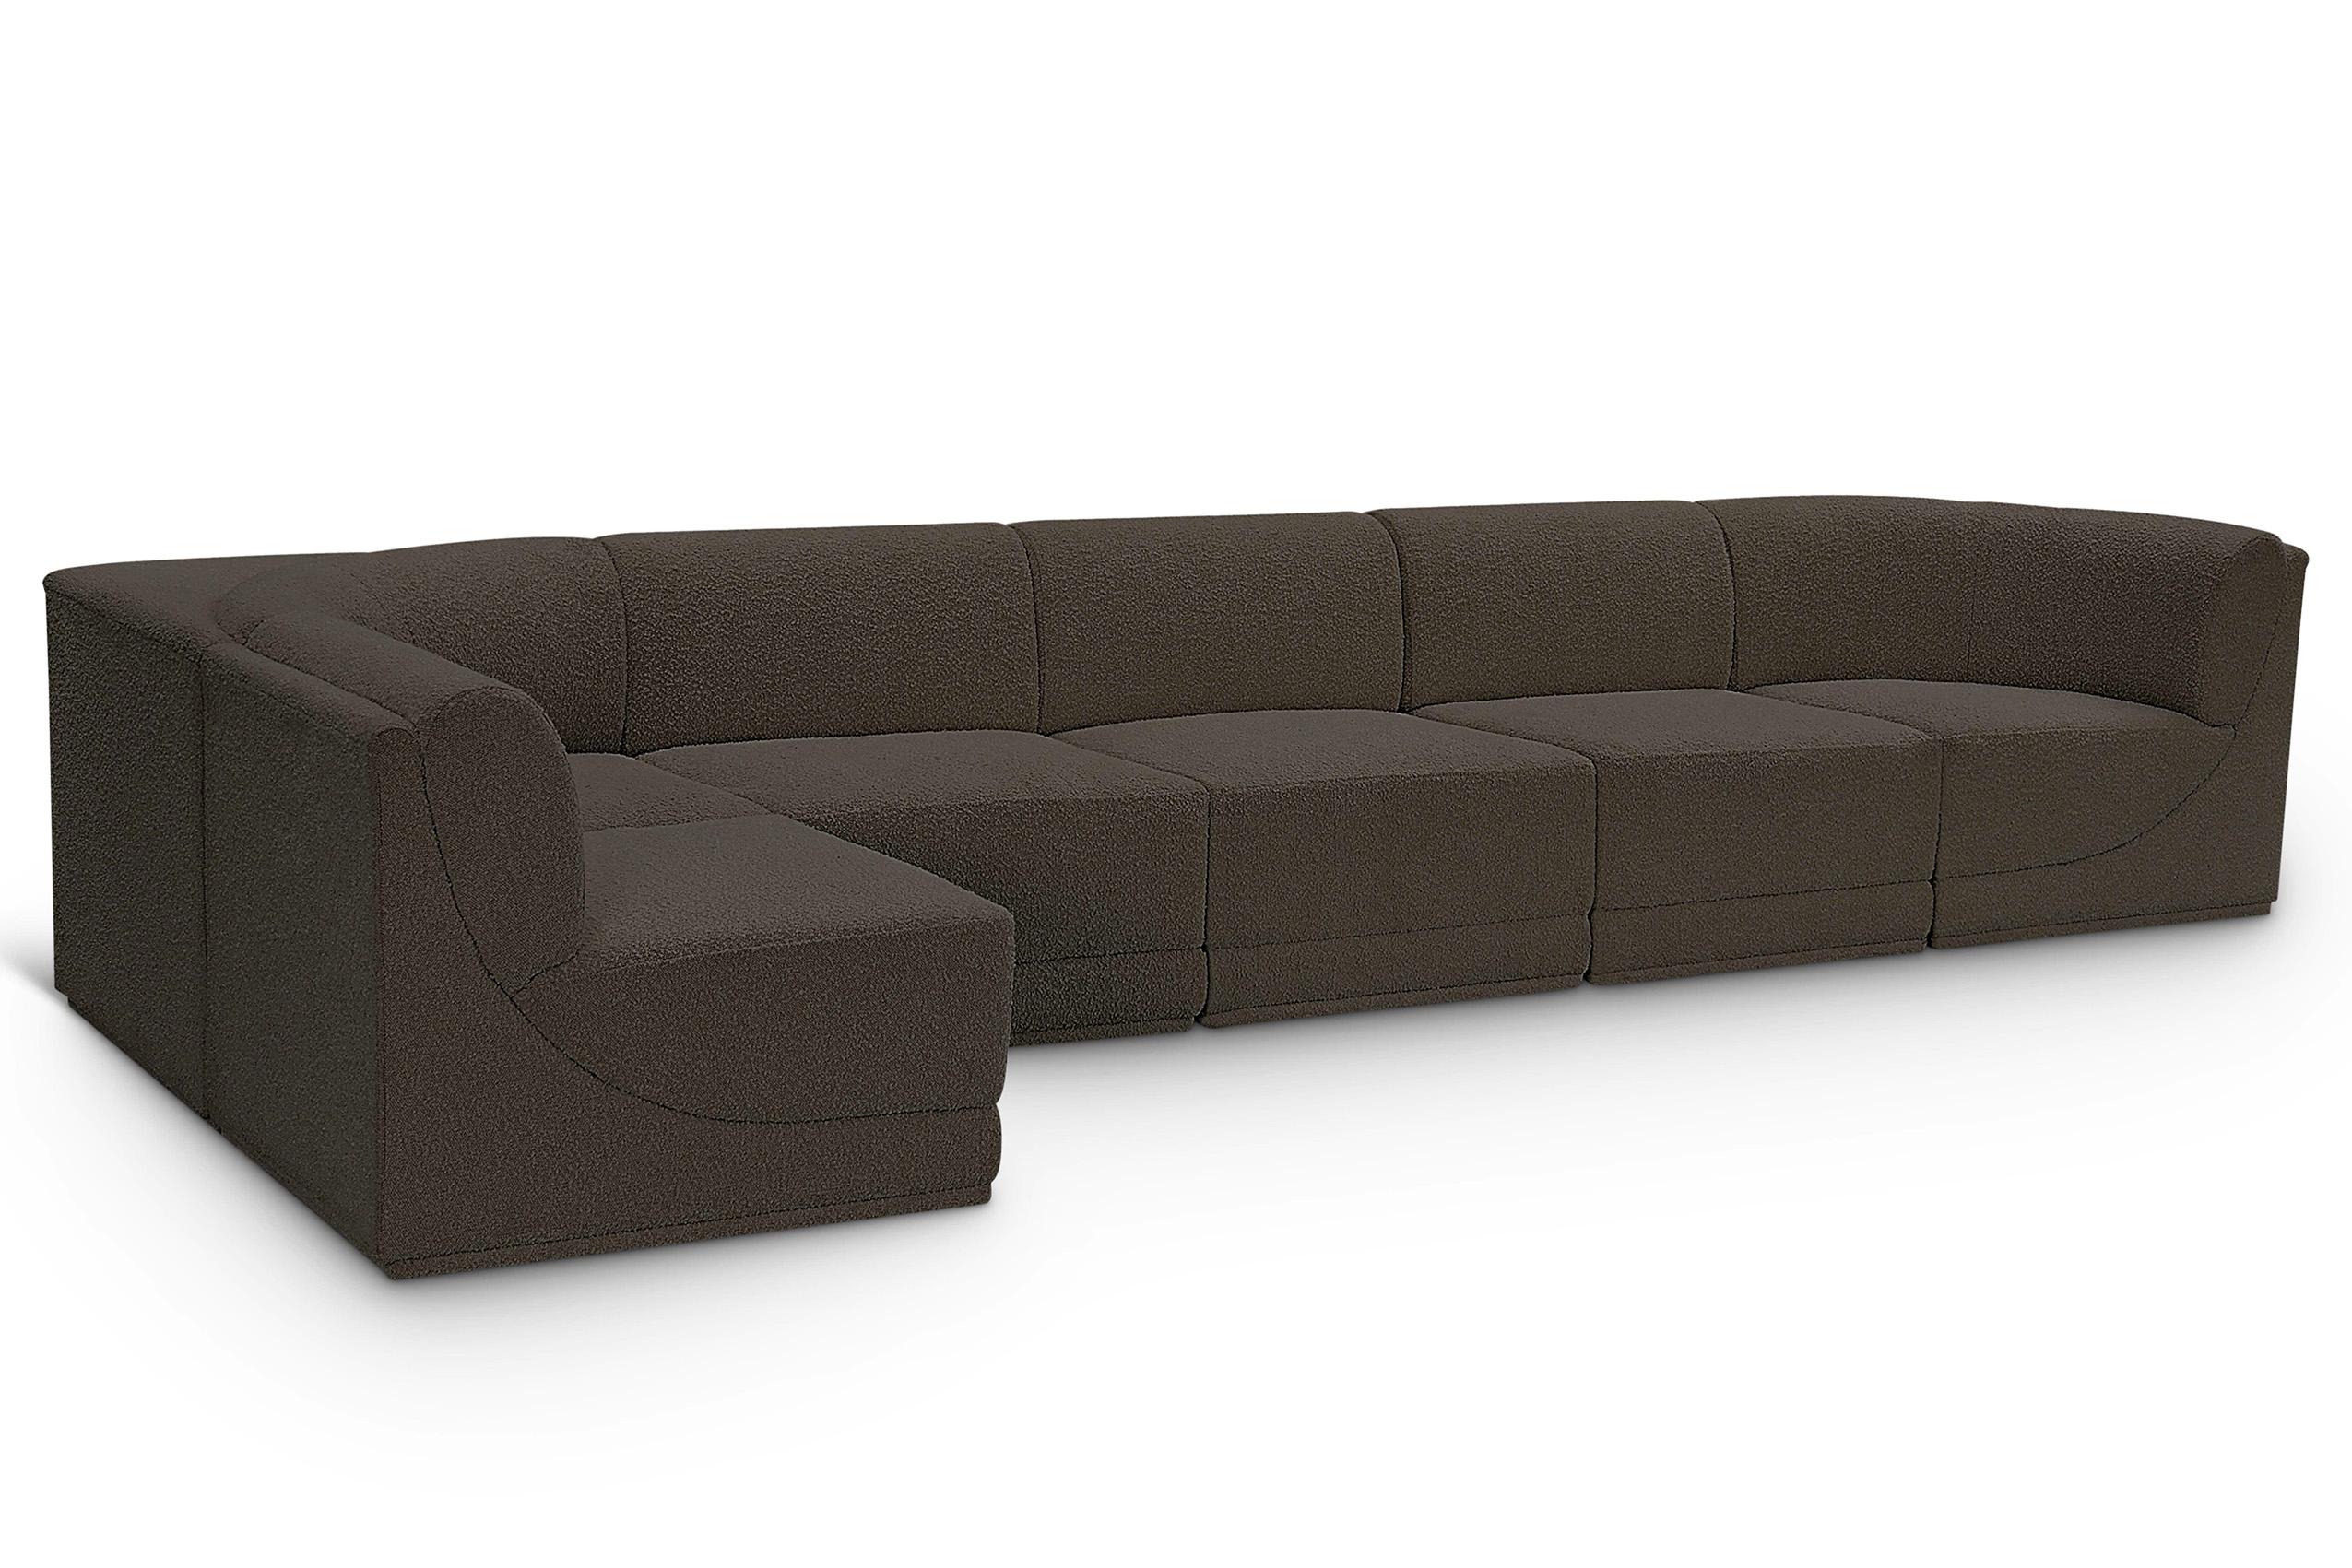 Contemporary, Modern Modular Sectional Ollie 118Brown-Sec6A 118Brown-Sec6A in Brown 